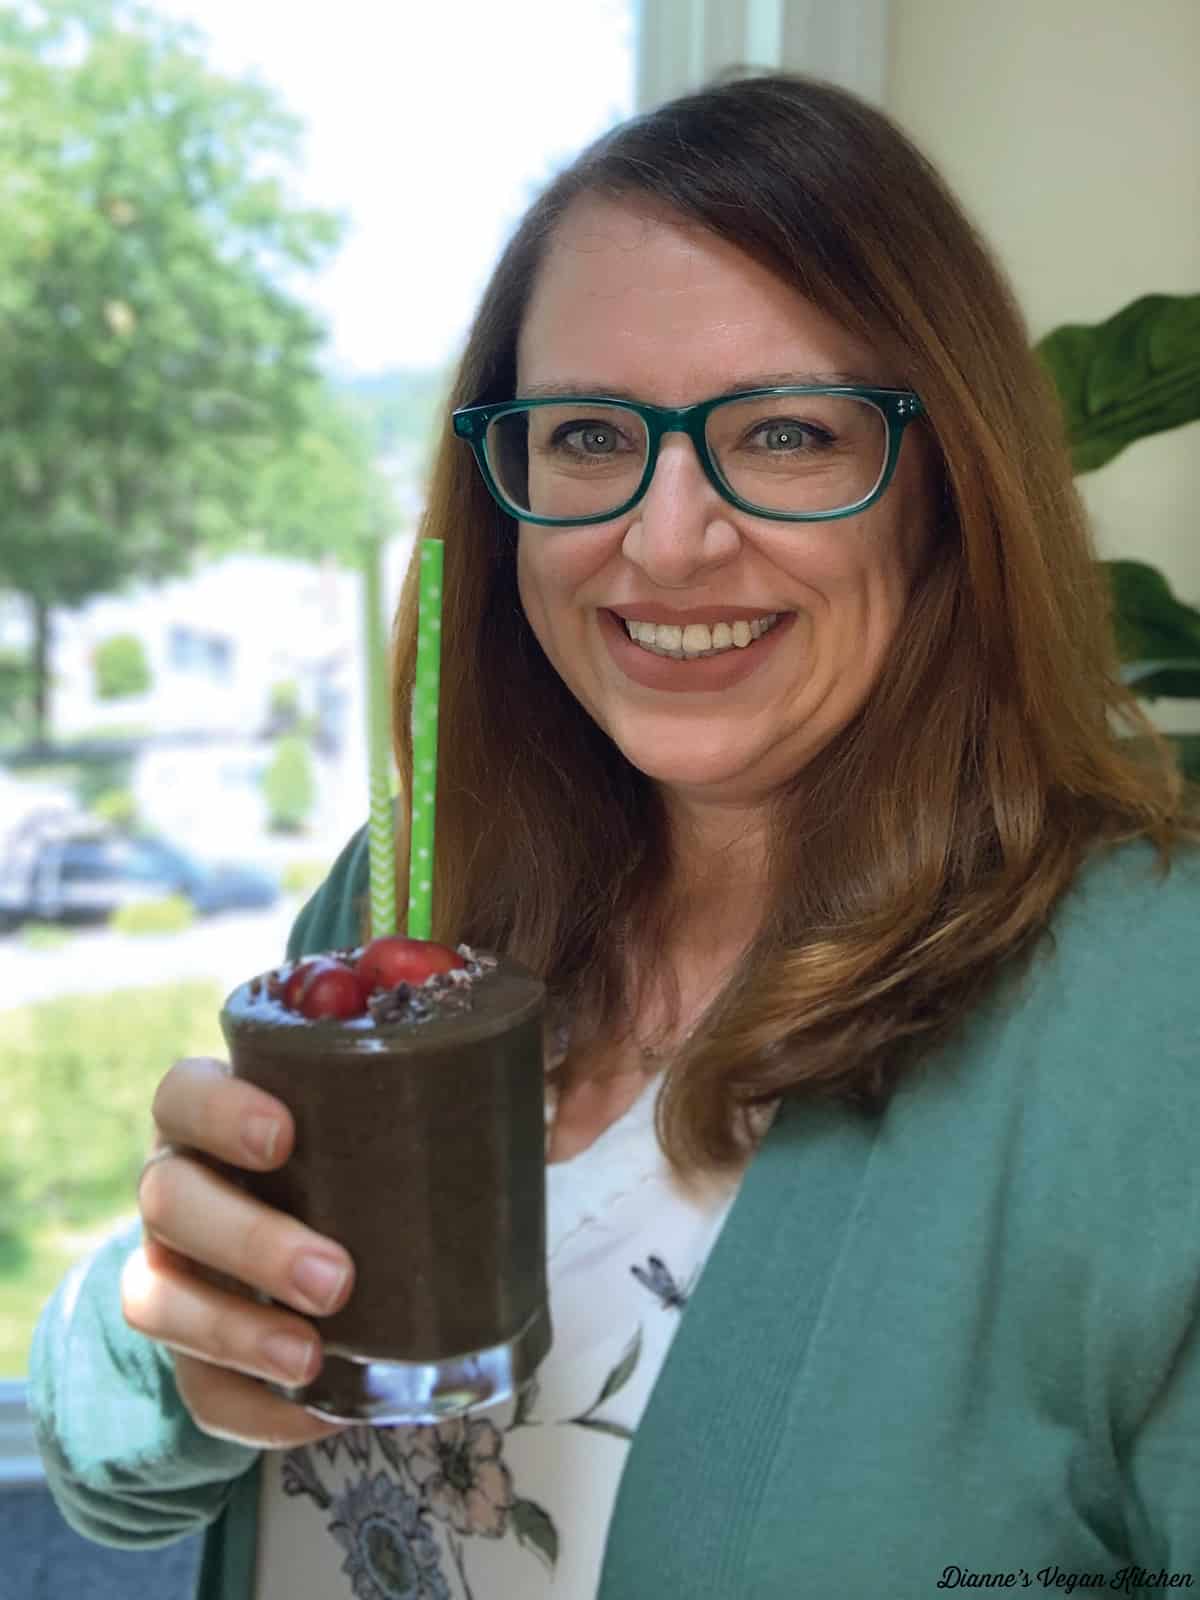 Dianne with a smoothie